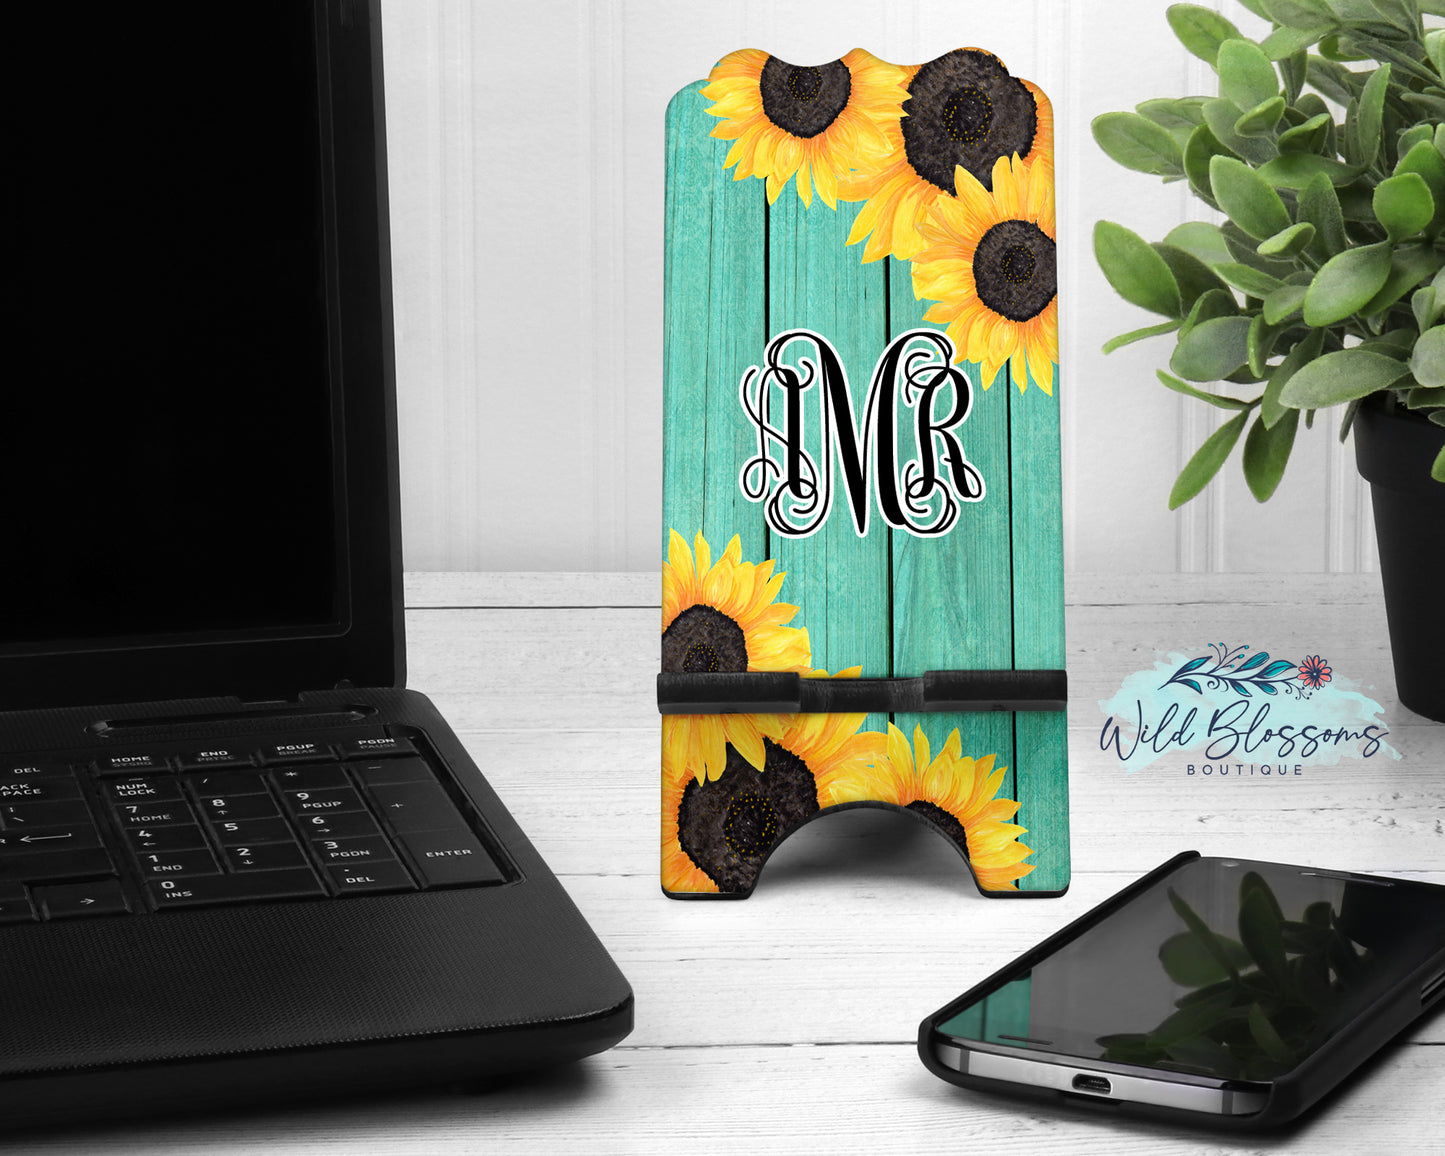 Teal Wooden Sunflower Personalized Mouse Pad And Coaster Desk Set